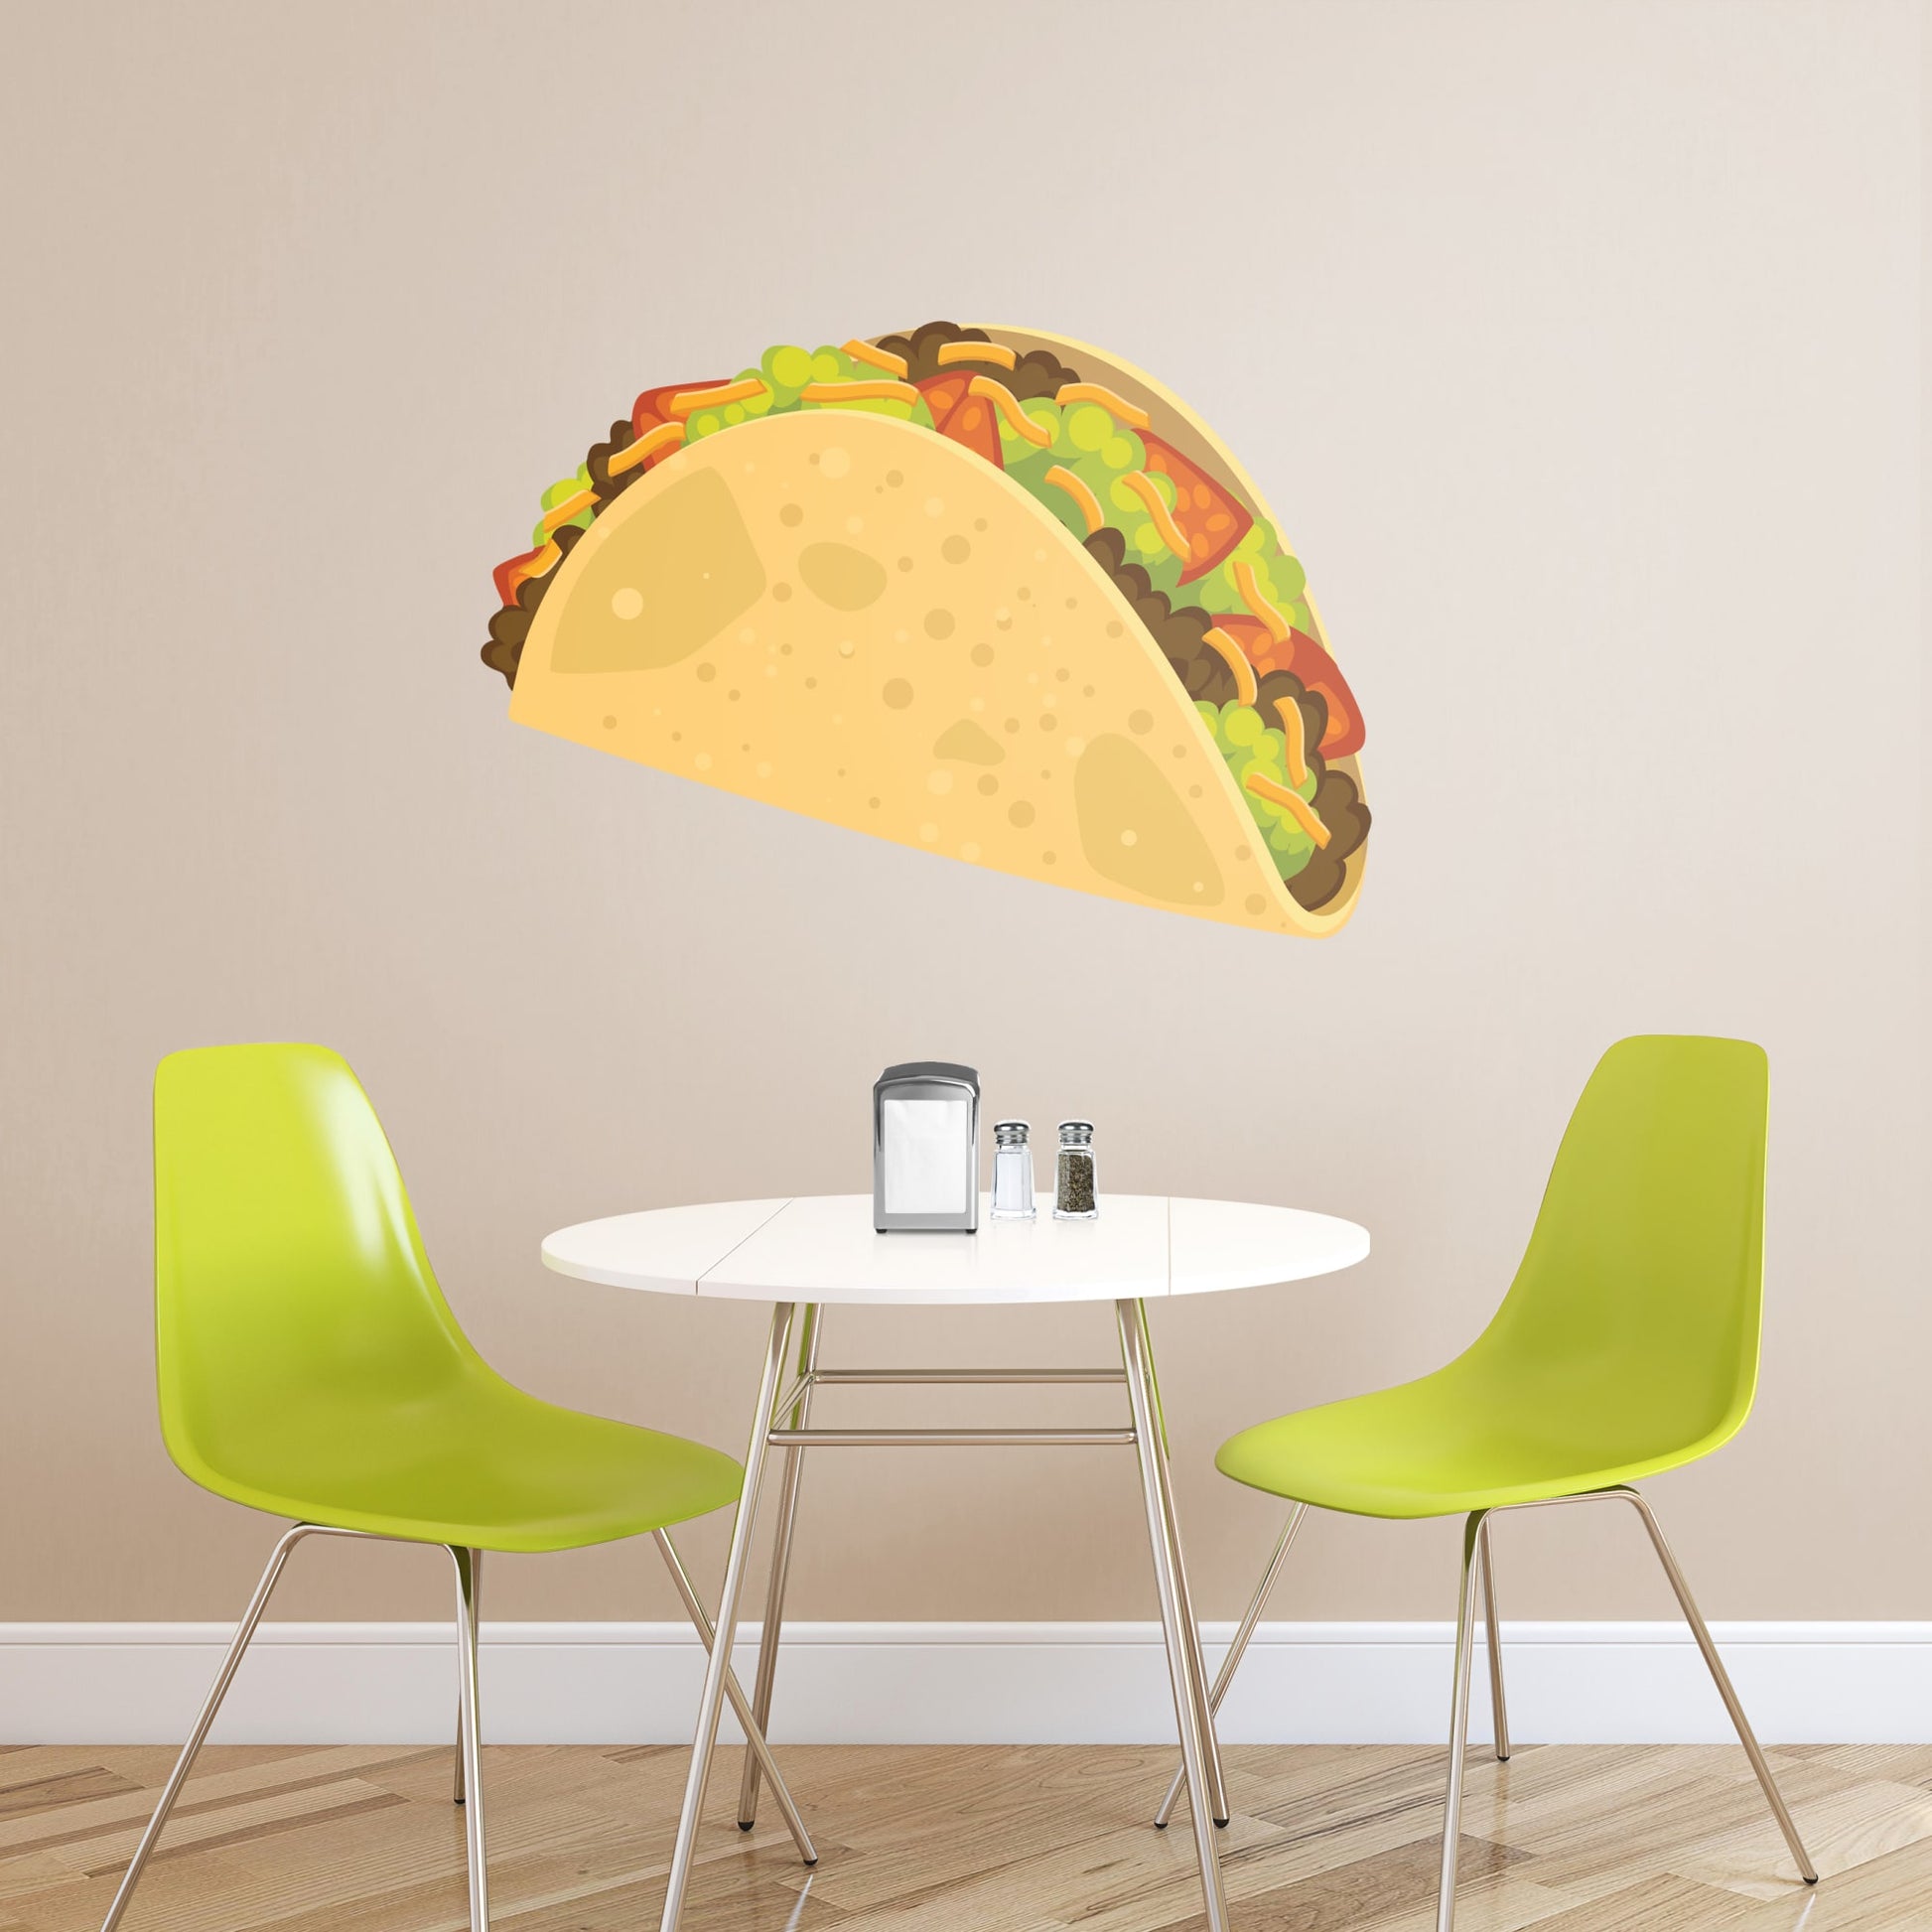 X-Large Taco + 2 Decals (33"W x 23"H)